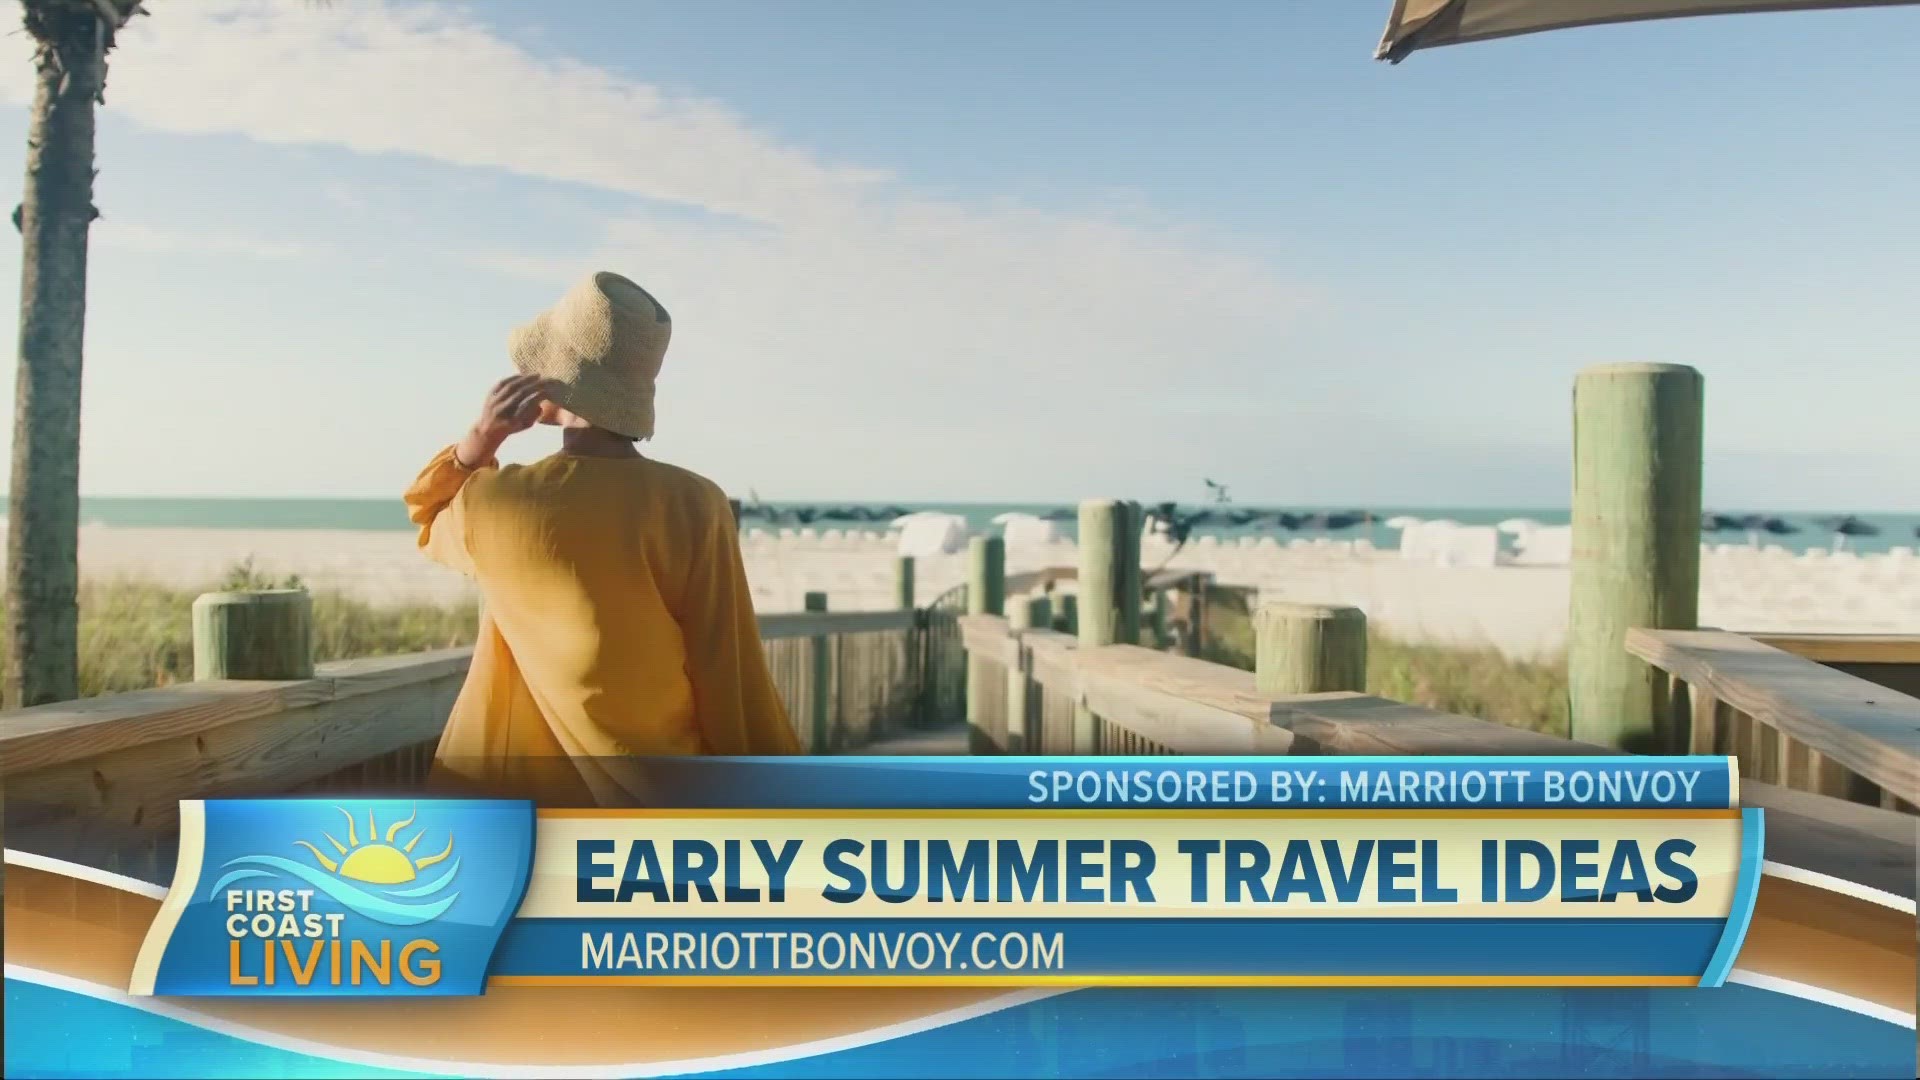 Travel expert, Jeanenne Tornatore shares her top early summer travel destinations.